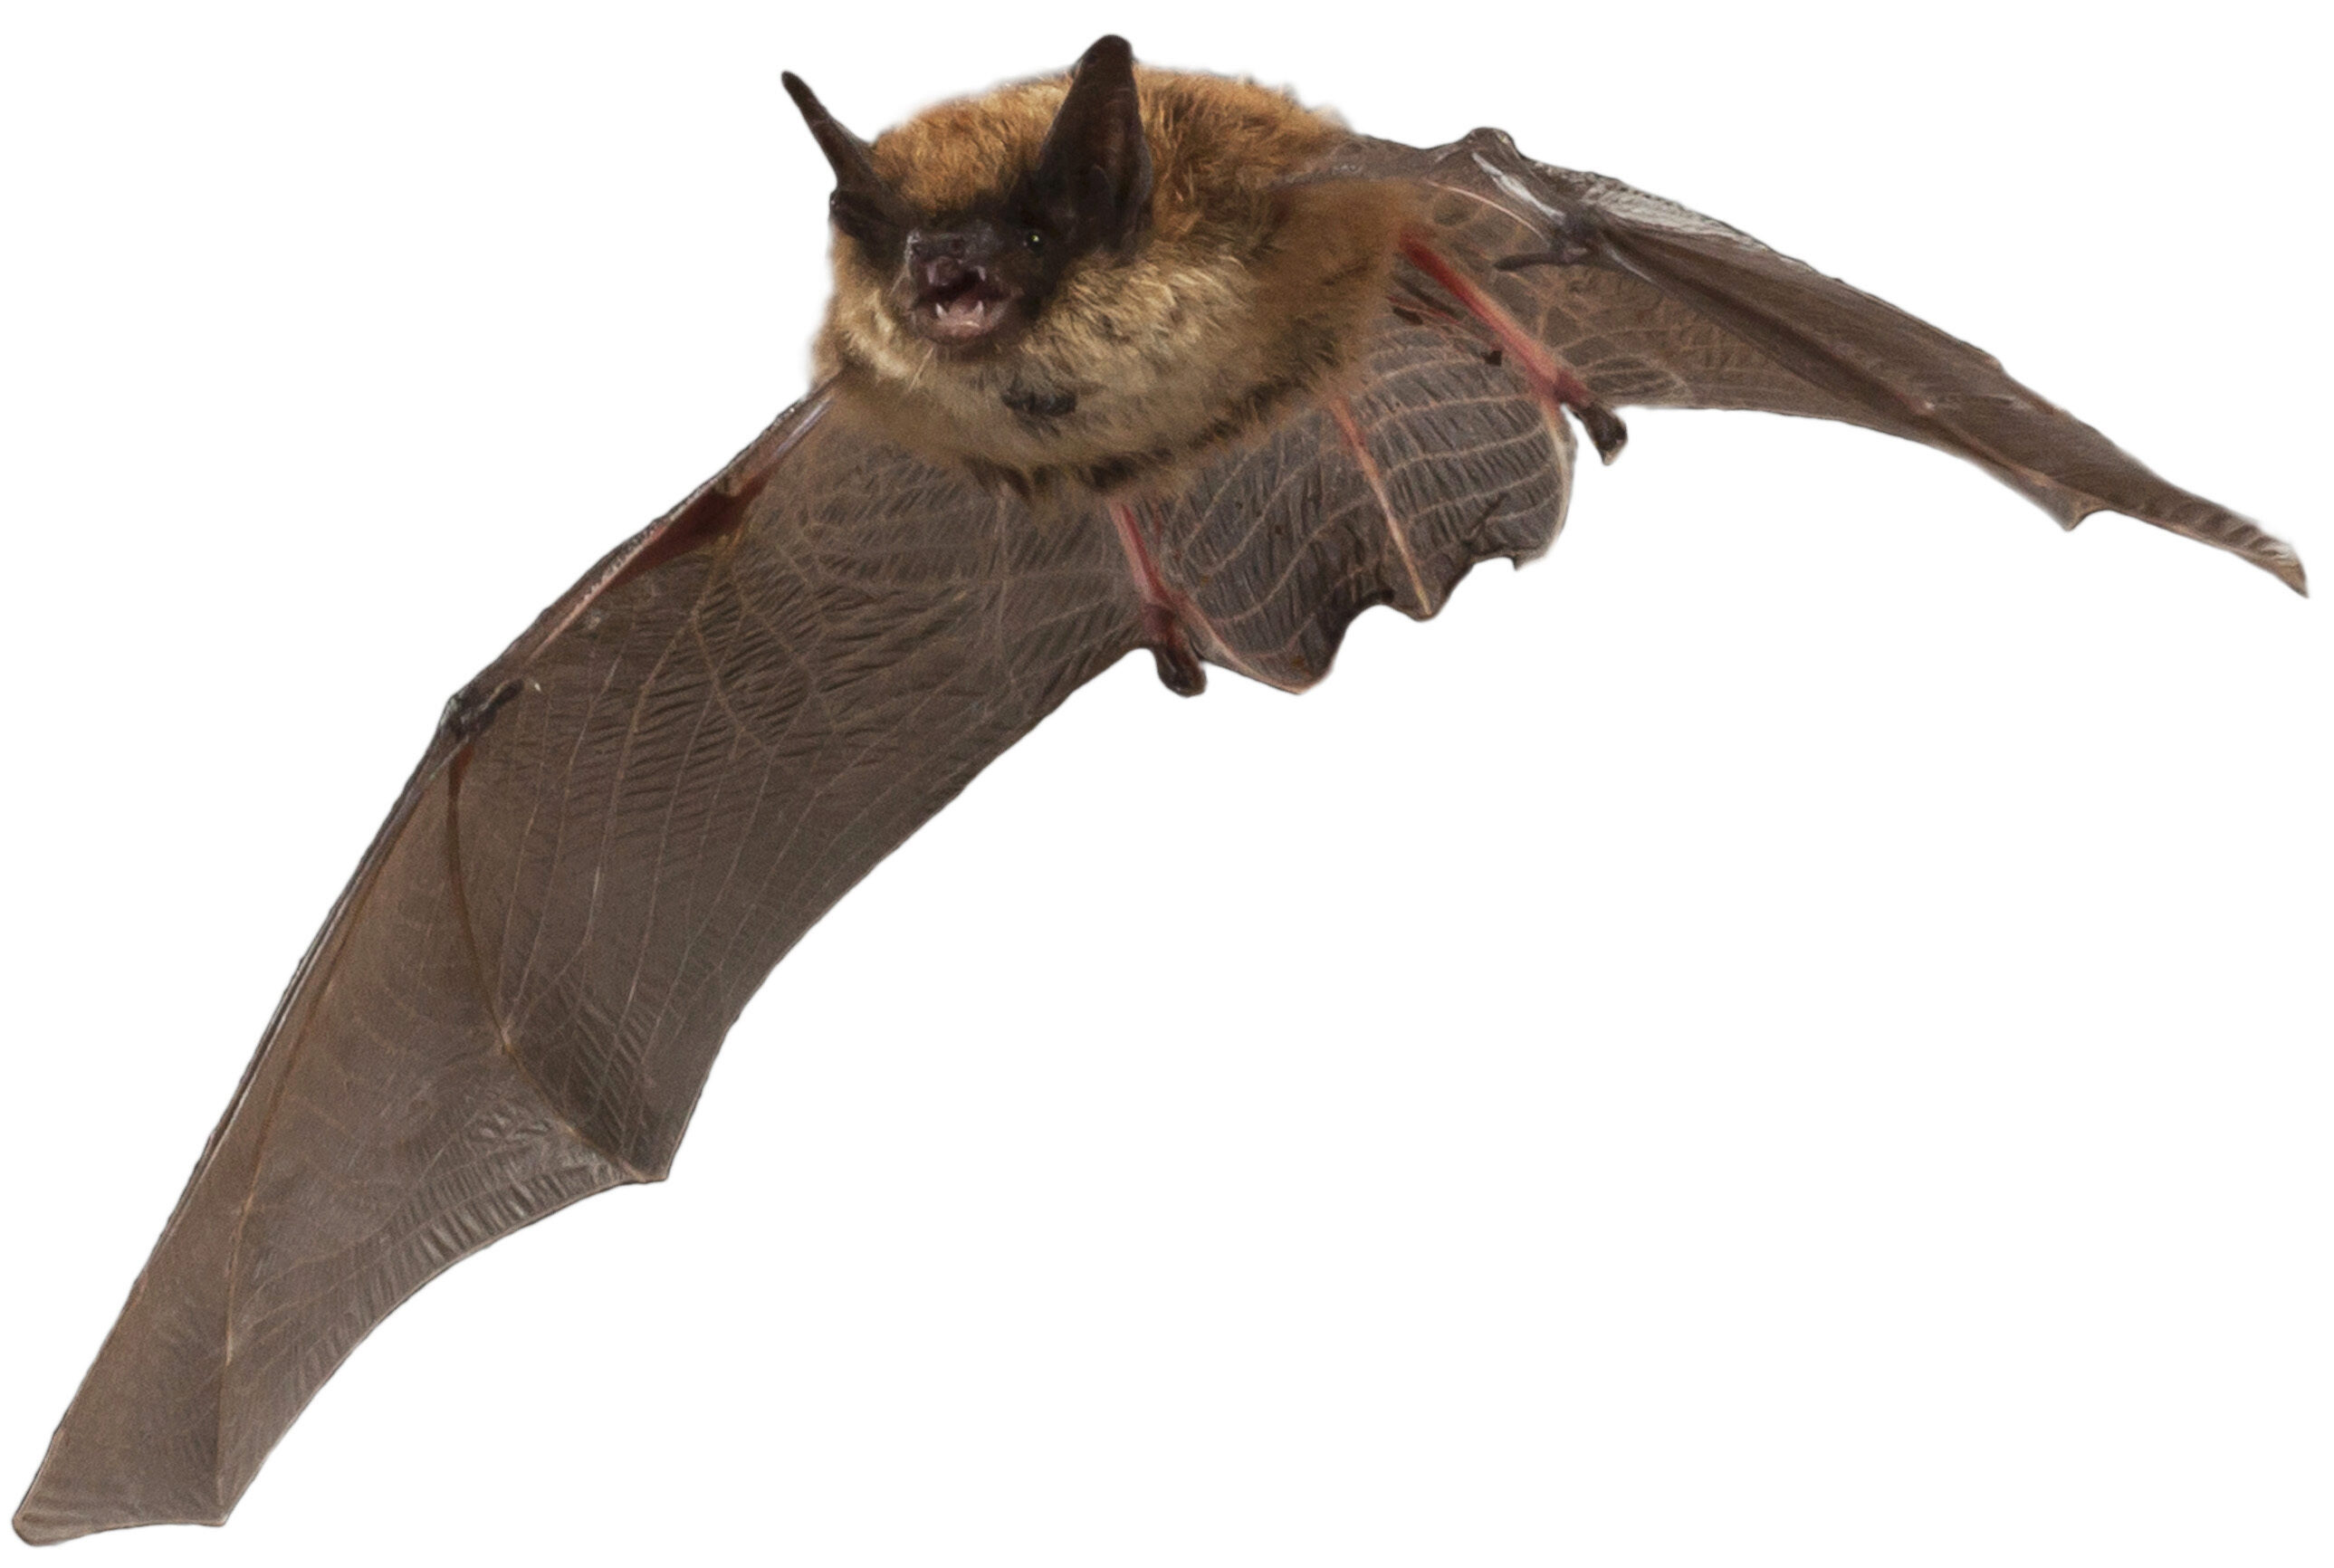 An eastern small-footed bat in flight.